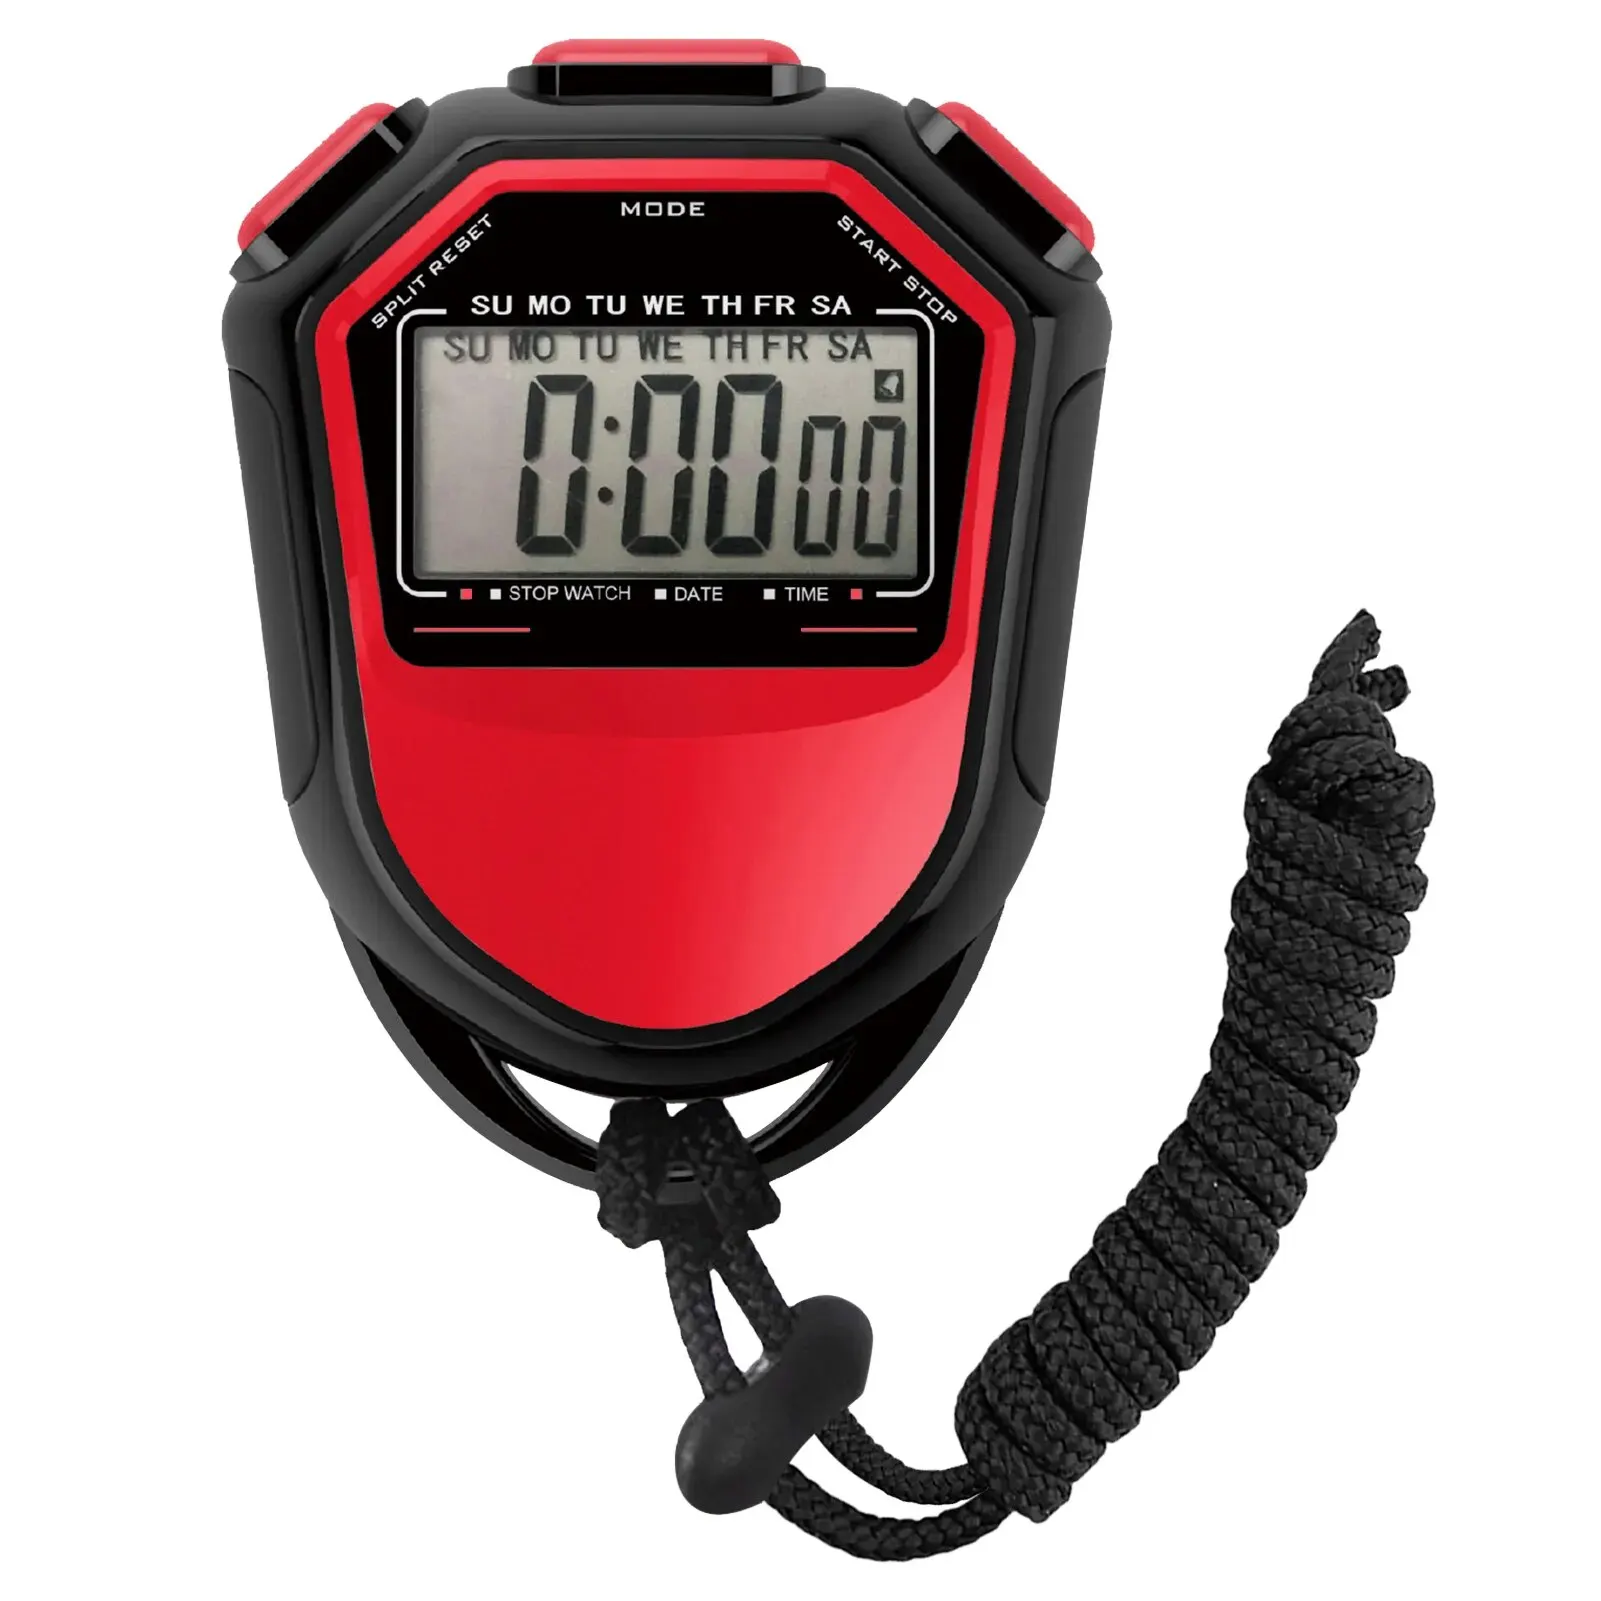 Waterproof Stopwatch Digital Handheld LCD Timer Chronograph Sports Counter with Strap for Swimming Running Football Training